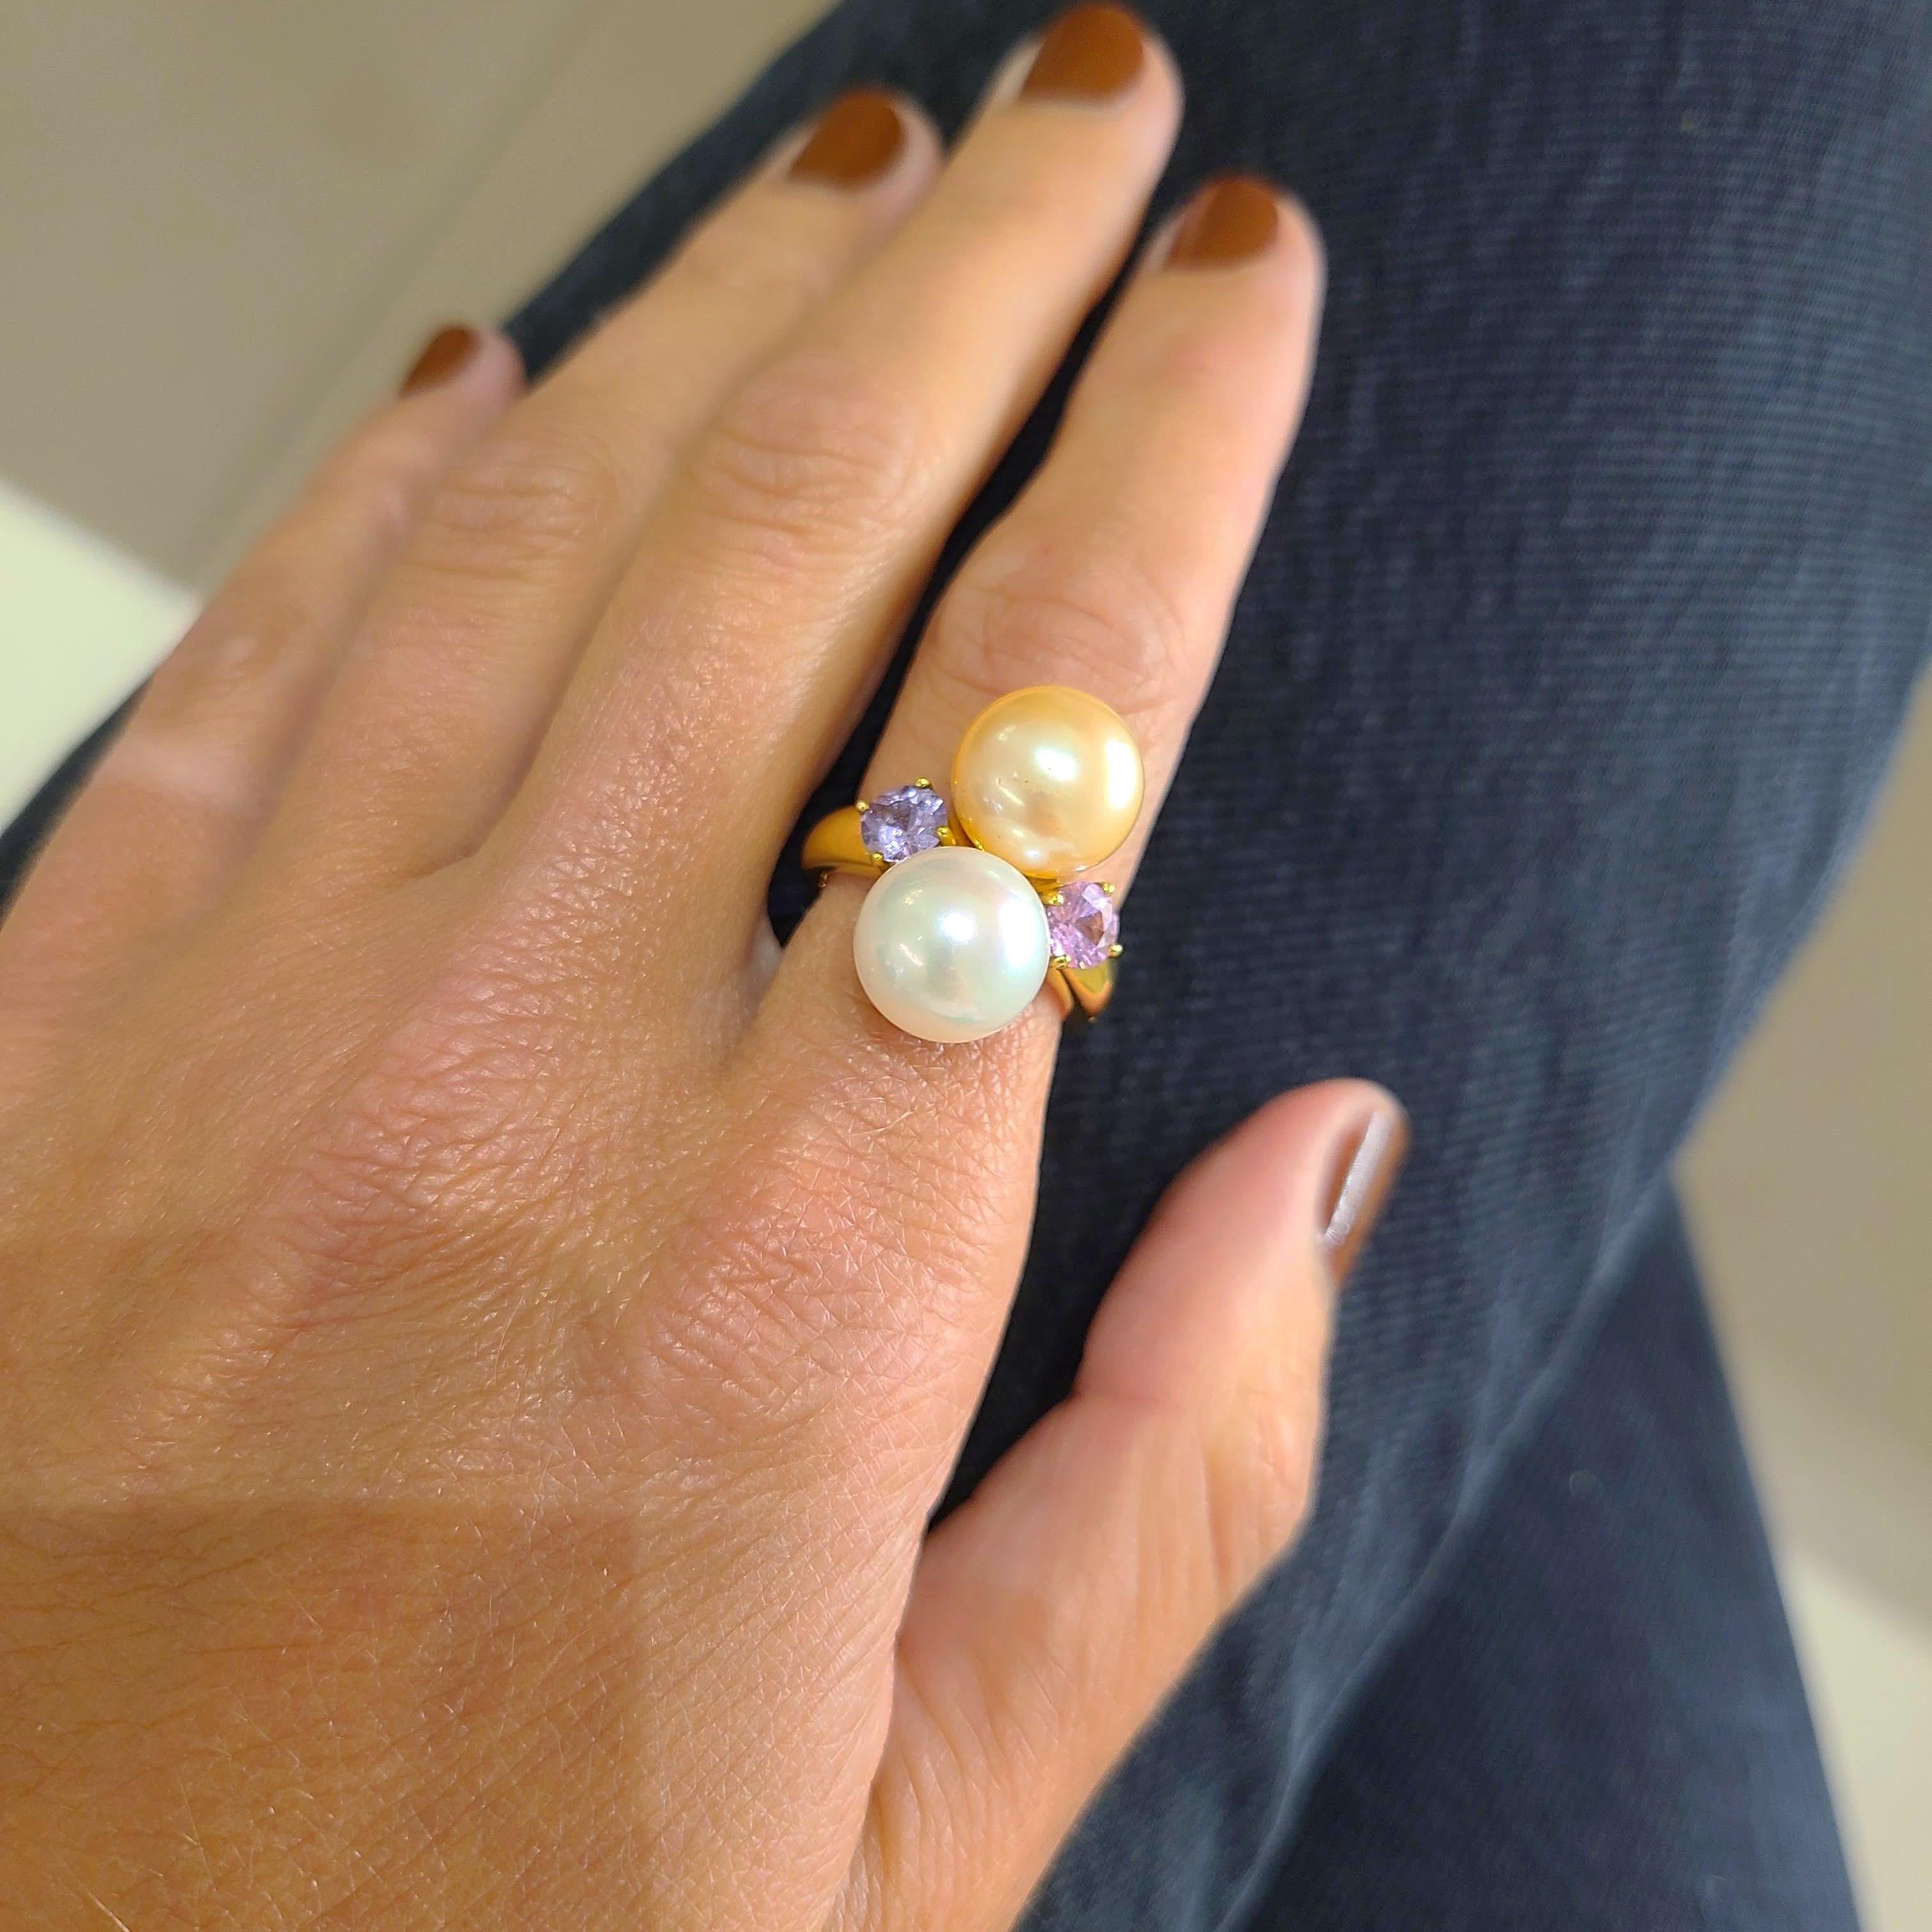 Schoeffel 18 Karat Yellow Gold Pearl Ring with Pink and Lavender Sapphires In New Condition For Sale In New York, NY